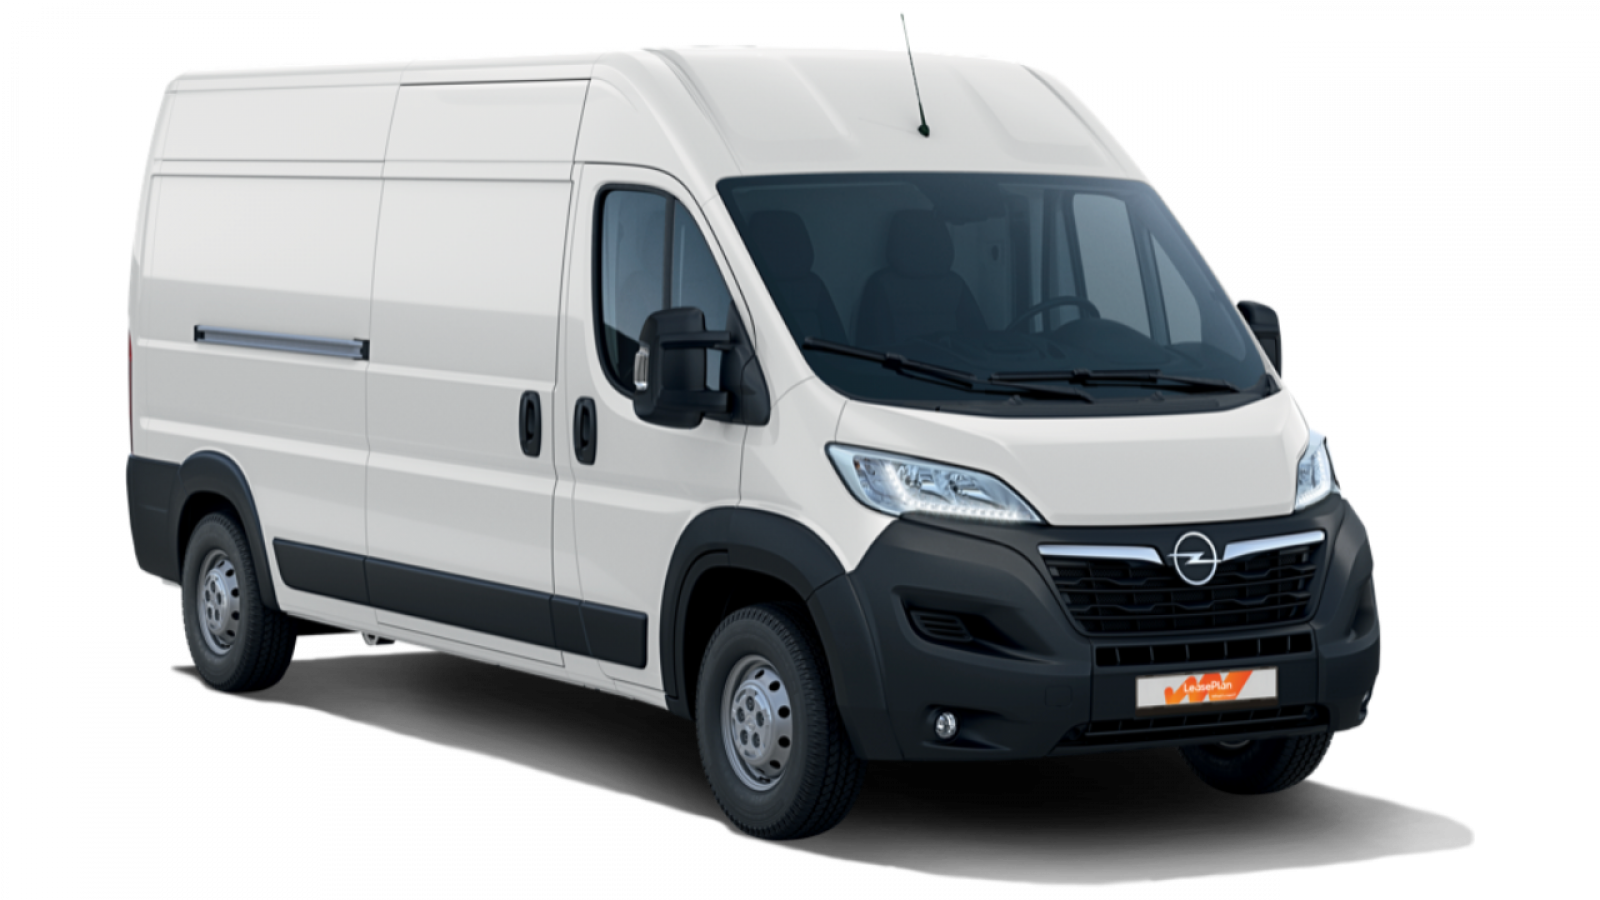 OPEL Movano L4H2 2.2 CDTi 121kW 3.5t FWD Edition HD large 215981 - operativní leasing